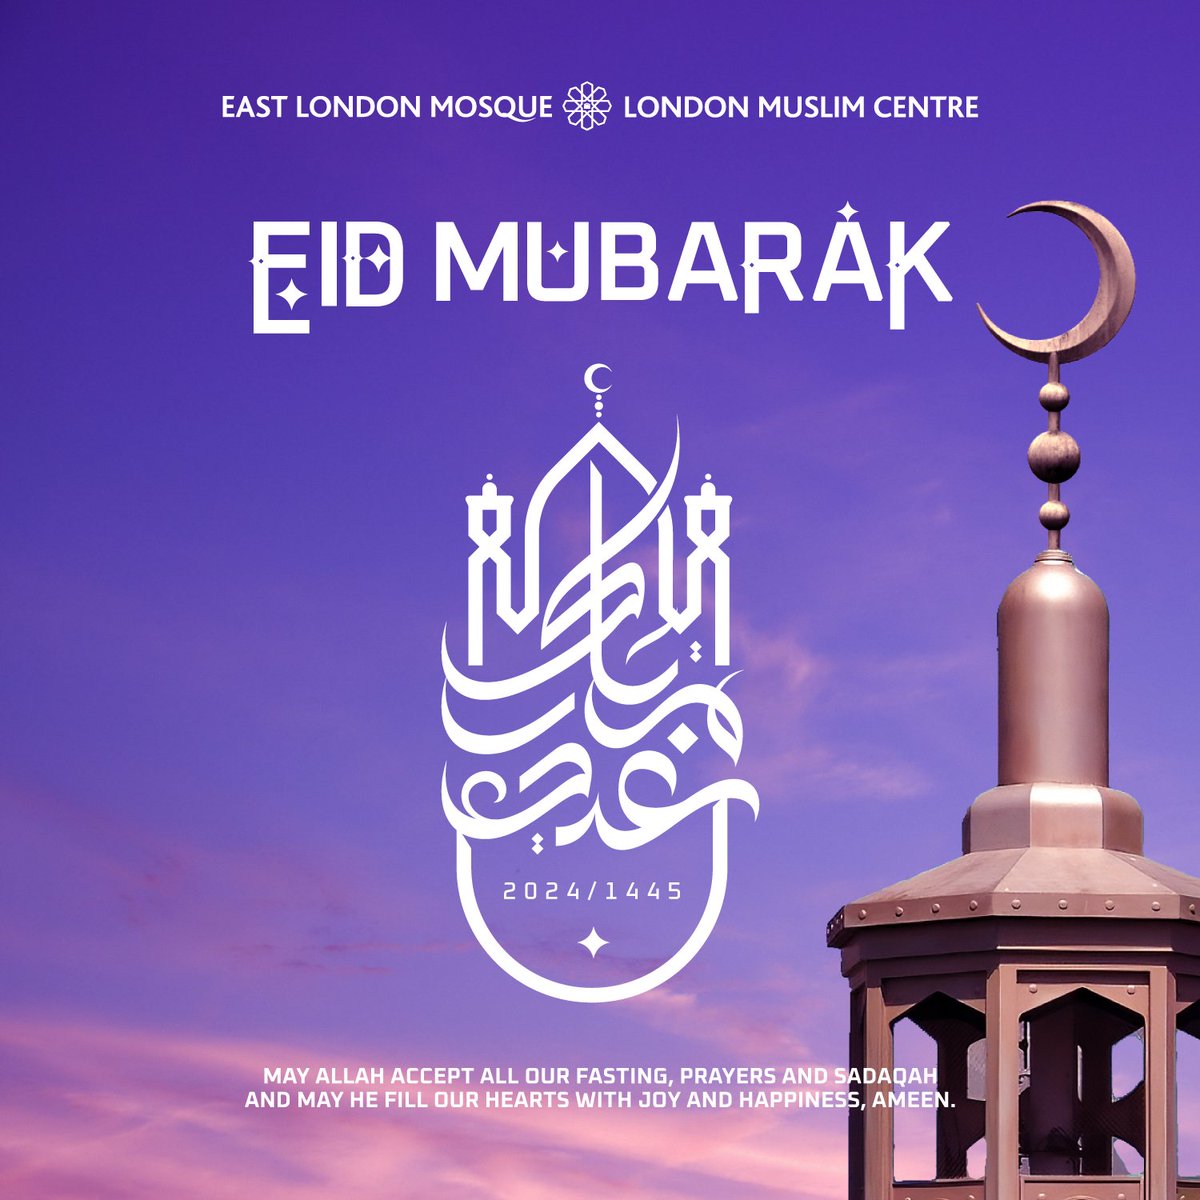 ✨Eid Mubarak from the East London Mosque✨🕌 As we mark the end of Ramadan 2024, let us carry forward the lessons of patience, compassion, and generosity into every day of our lives 👉 eastlondonmosque.org.uk/donate #EidMubarak #EidulFitr #Generosity #CommunitySpirit